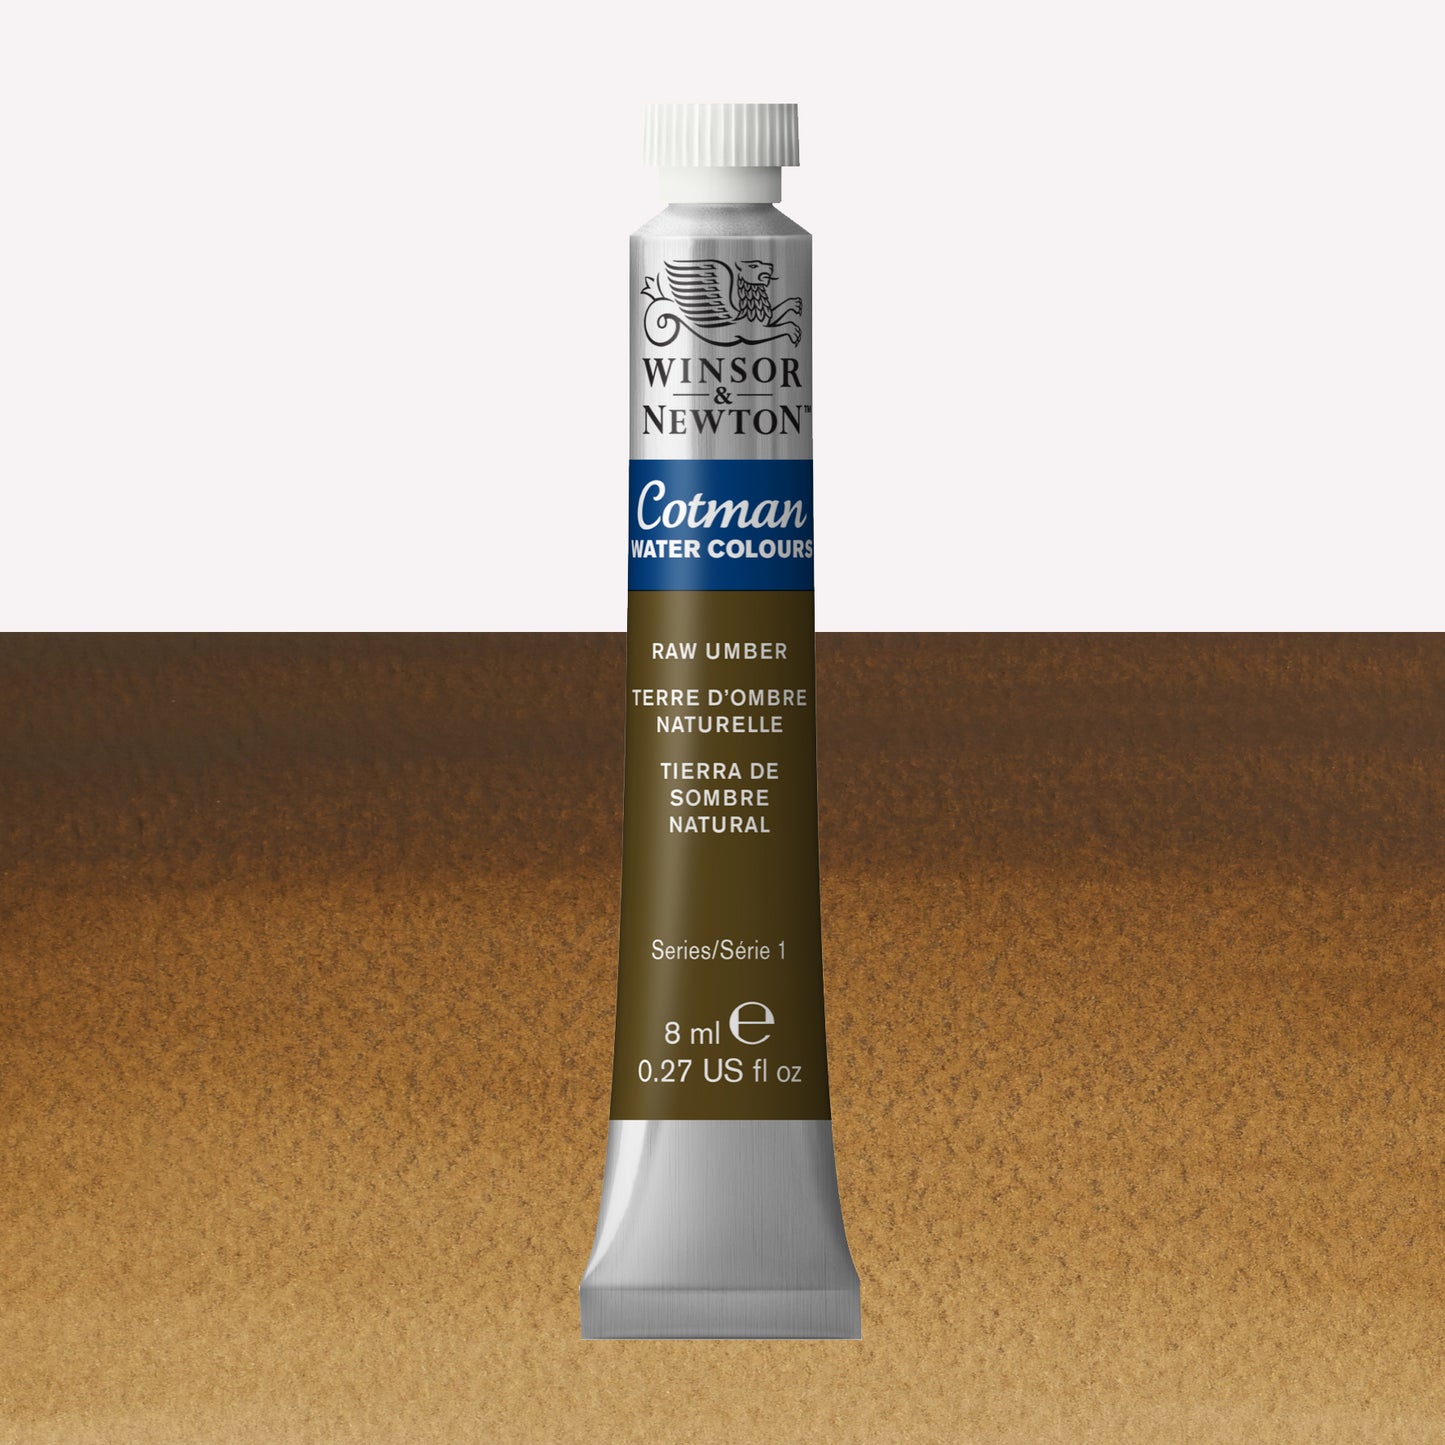 Winsor & Newton Cotman watercolour paint packaged in 8ml silver tube with a white lid in the shade Raw Umber over a highly pigmented colour swatch.